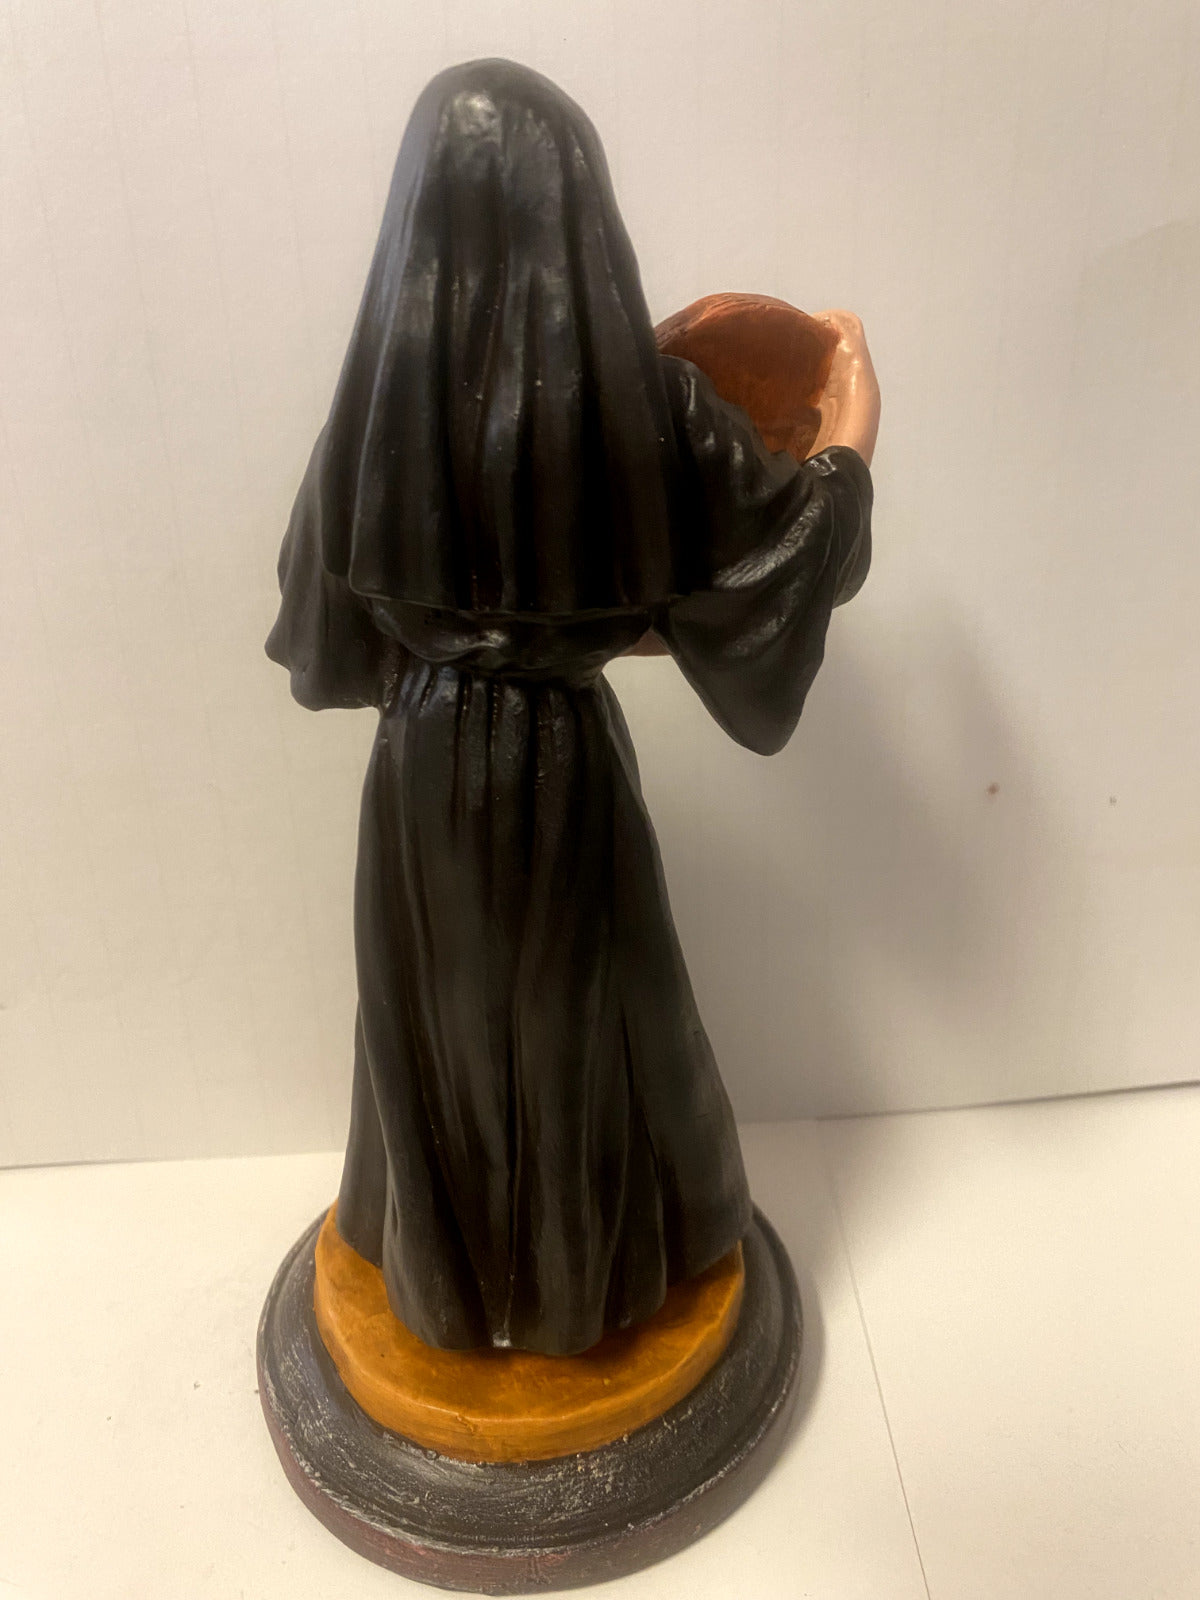 Saint Sister Faustina 7.5" Statue, New from Colombia - Bob and Penny Lord